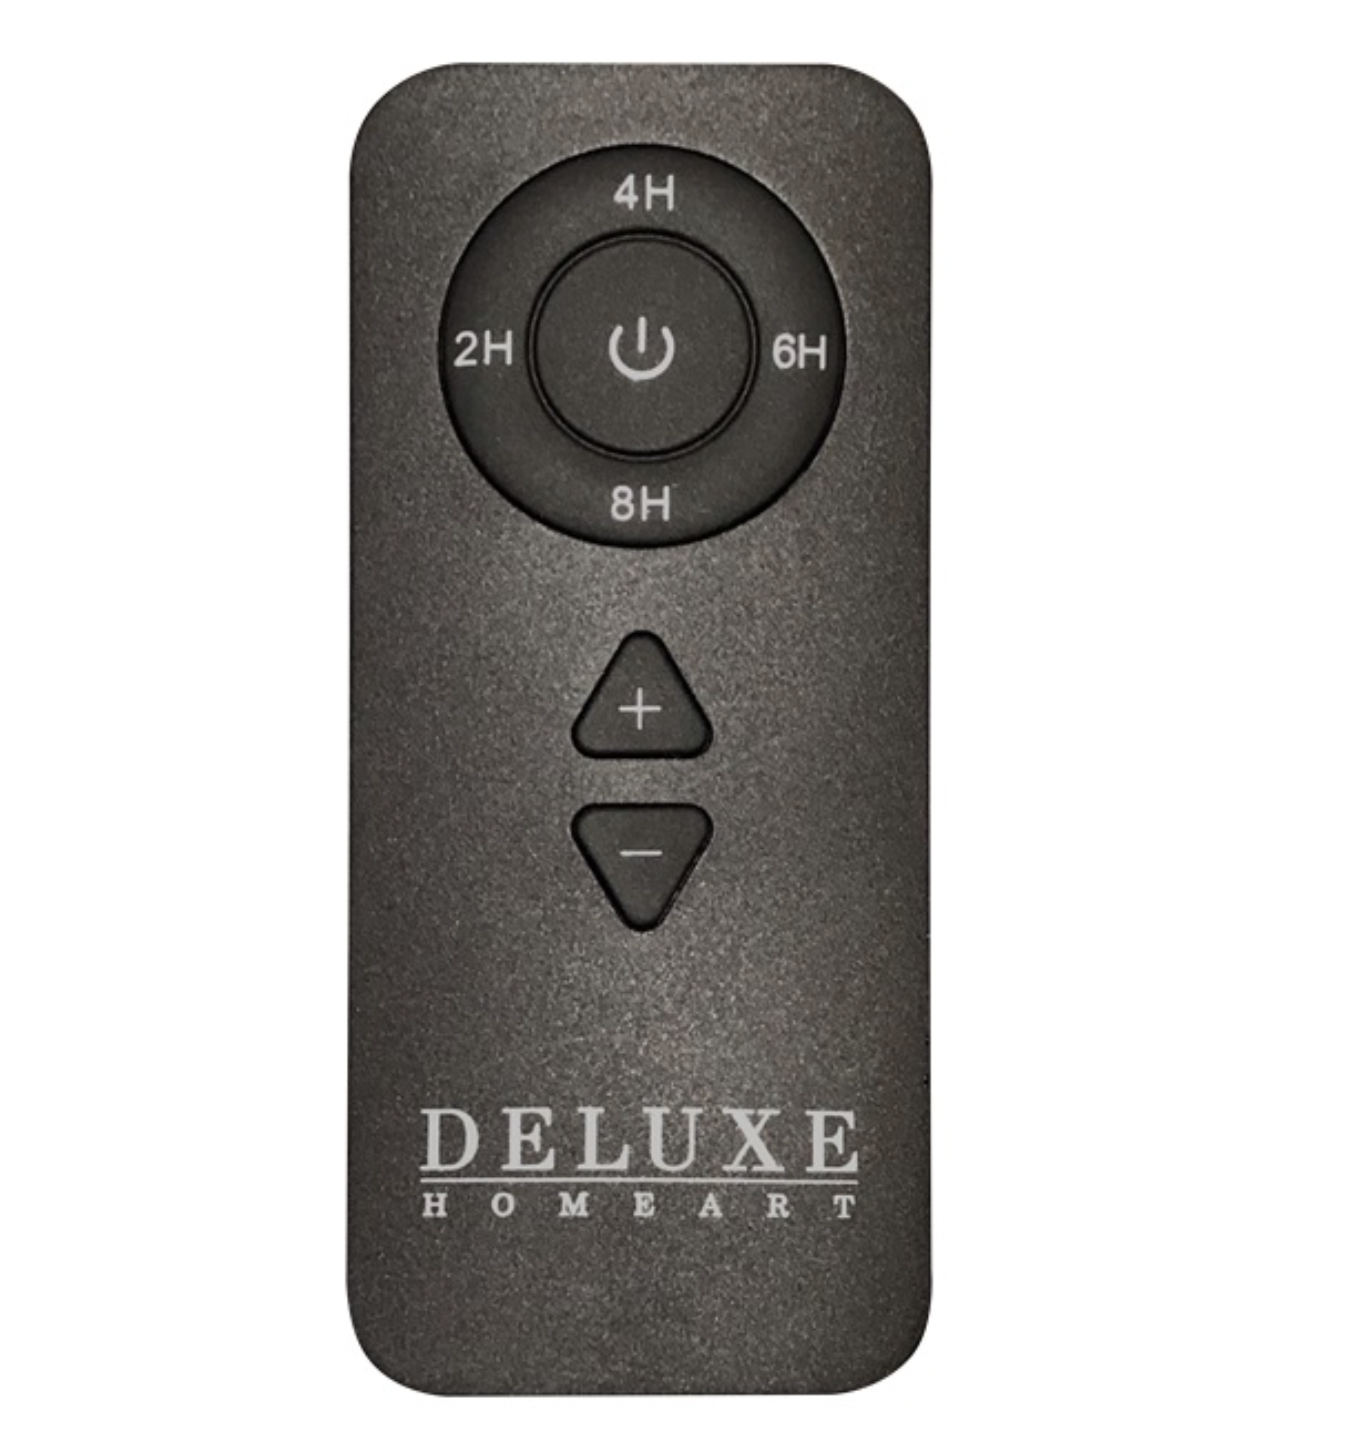 Deluxe Homeart Candle Remote